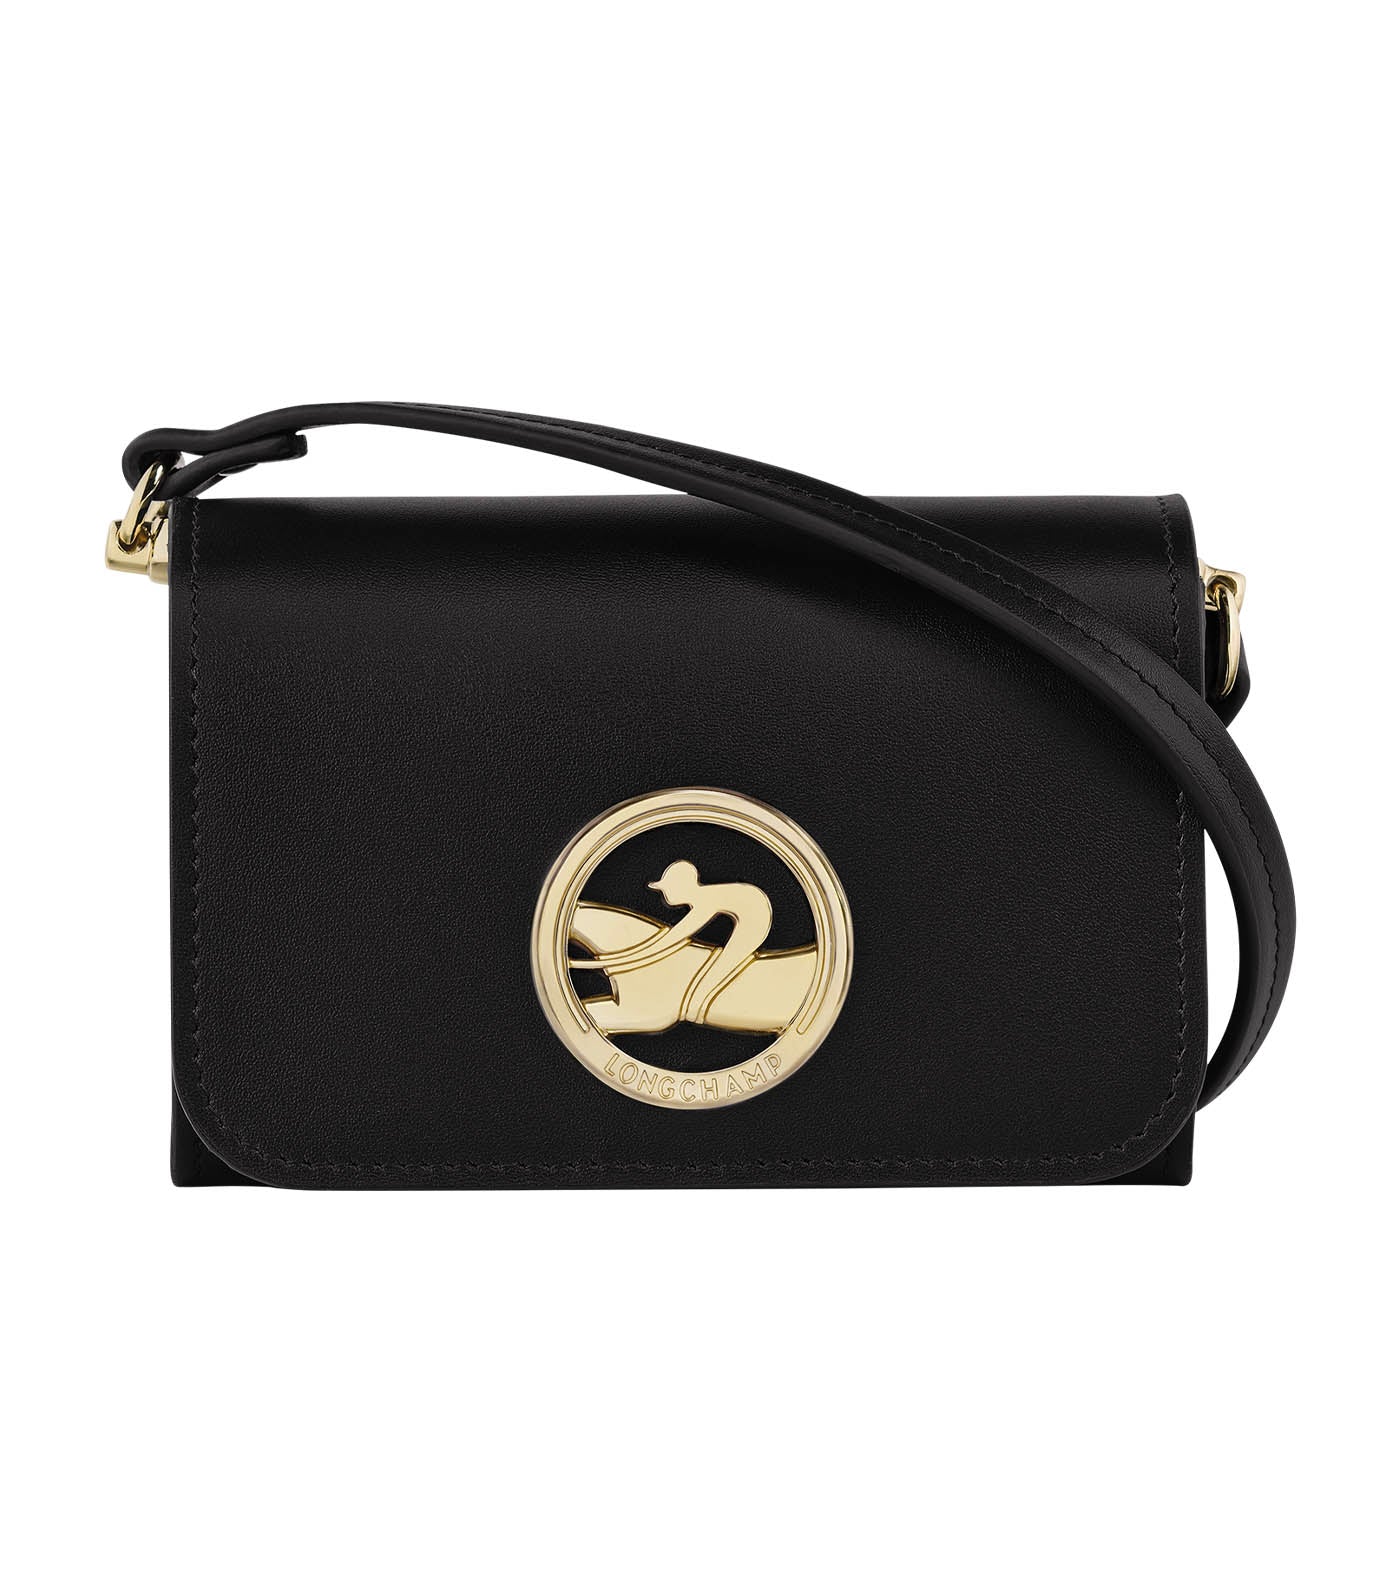 Box-Trot Coin Purse with Shoulder Strap Black